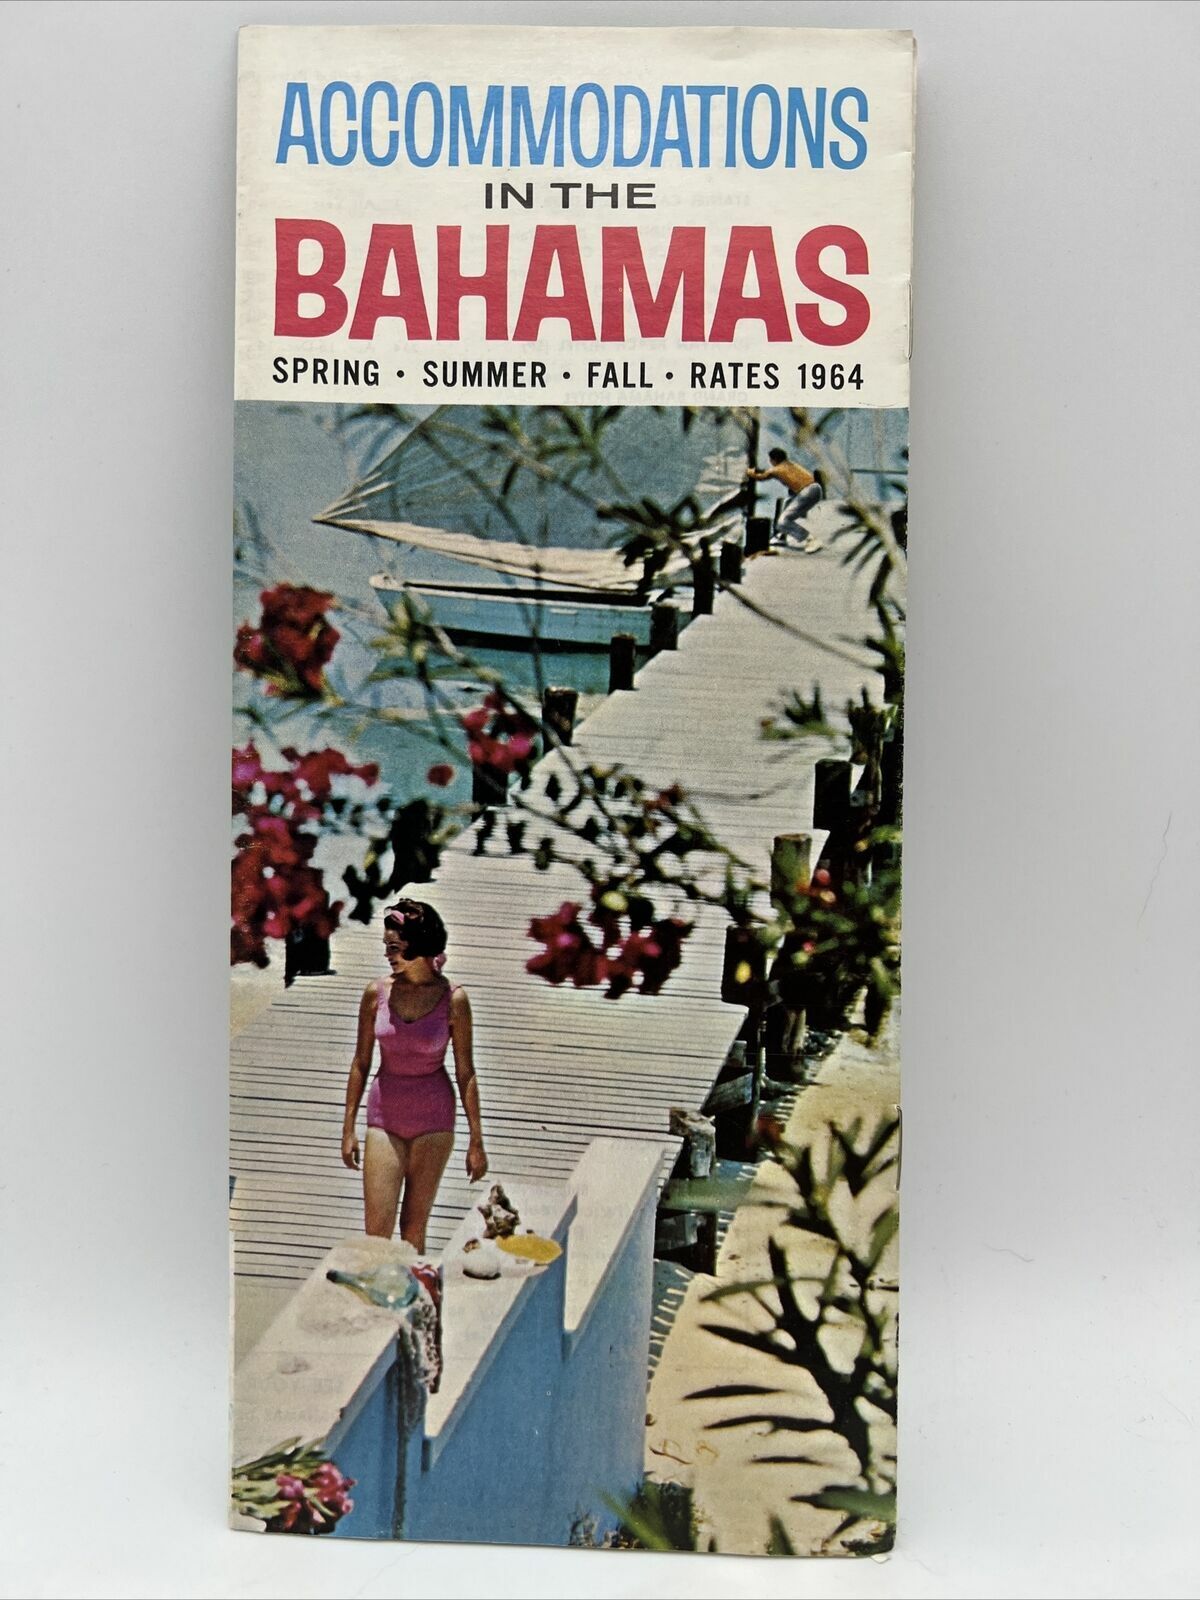 1964 Accommodations In The Bahamas Nassau Travel Tour Guide Brochure Rates & Map